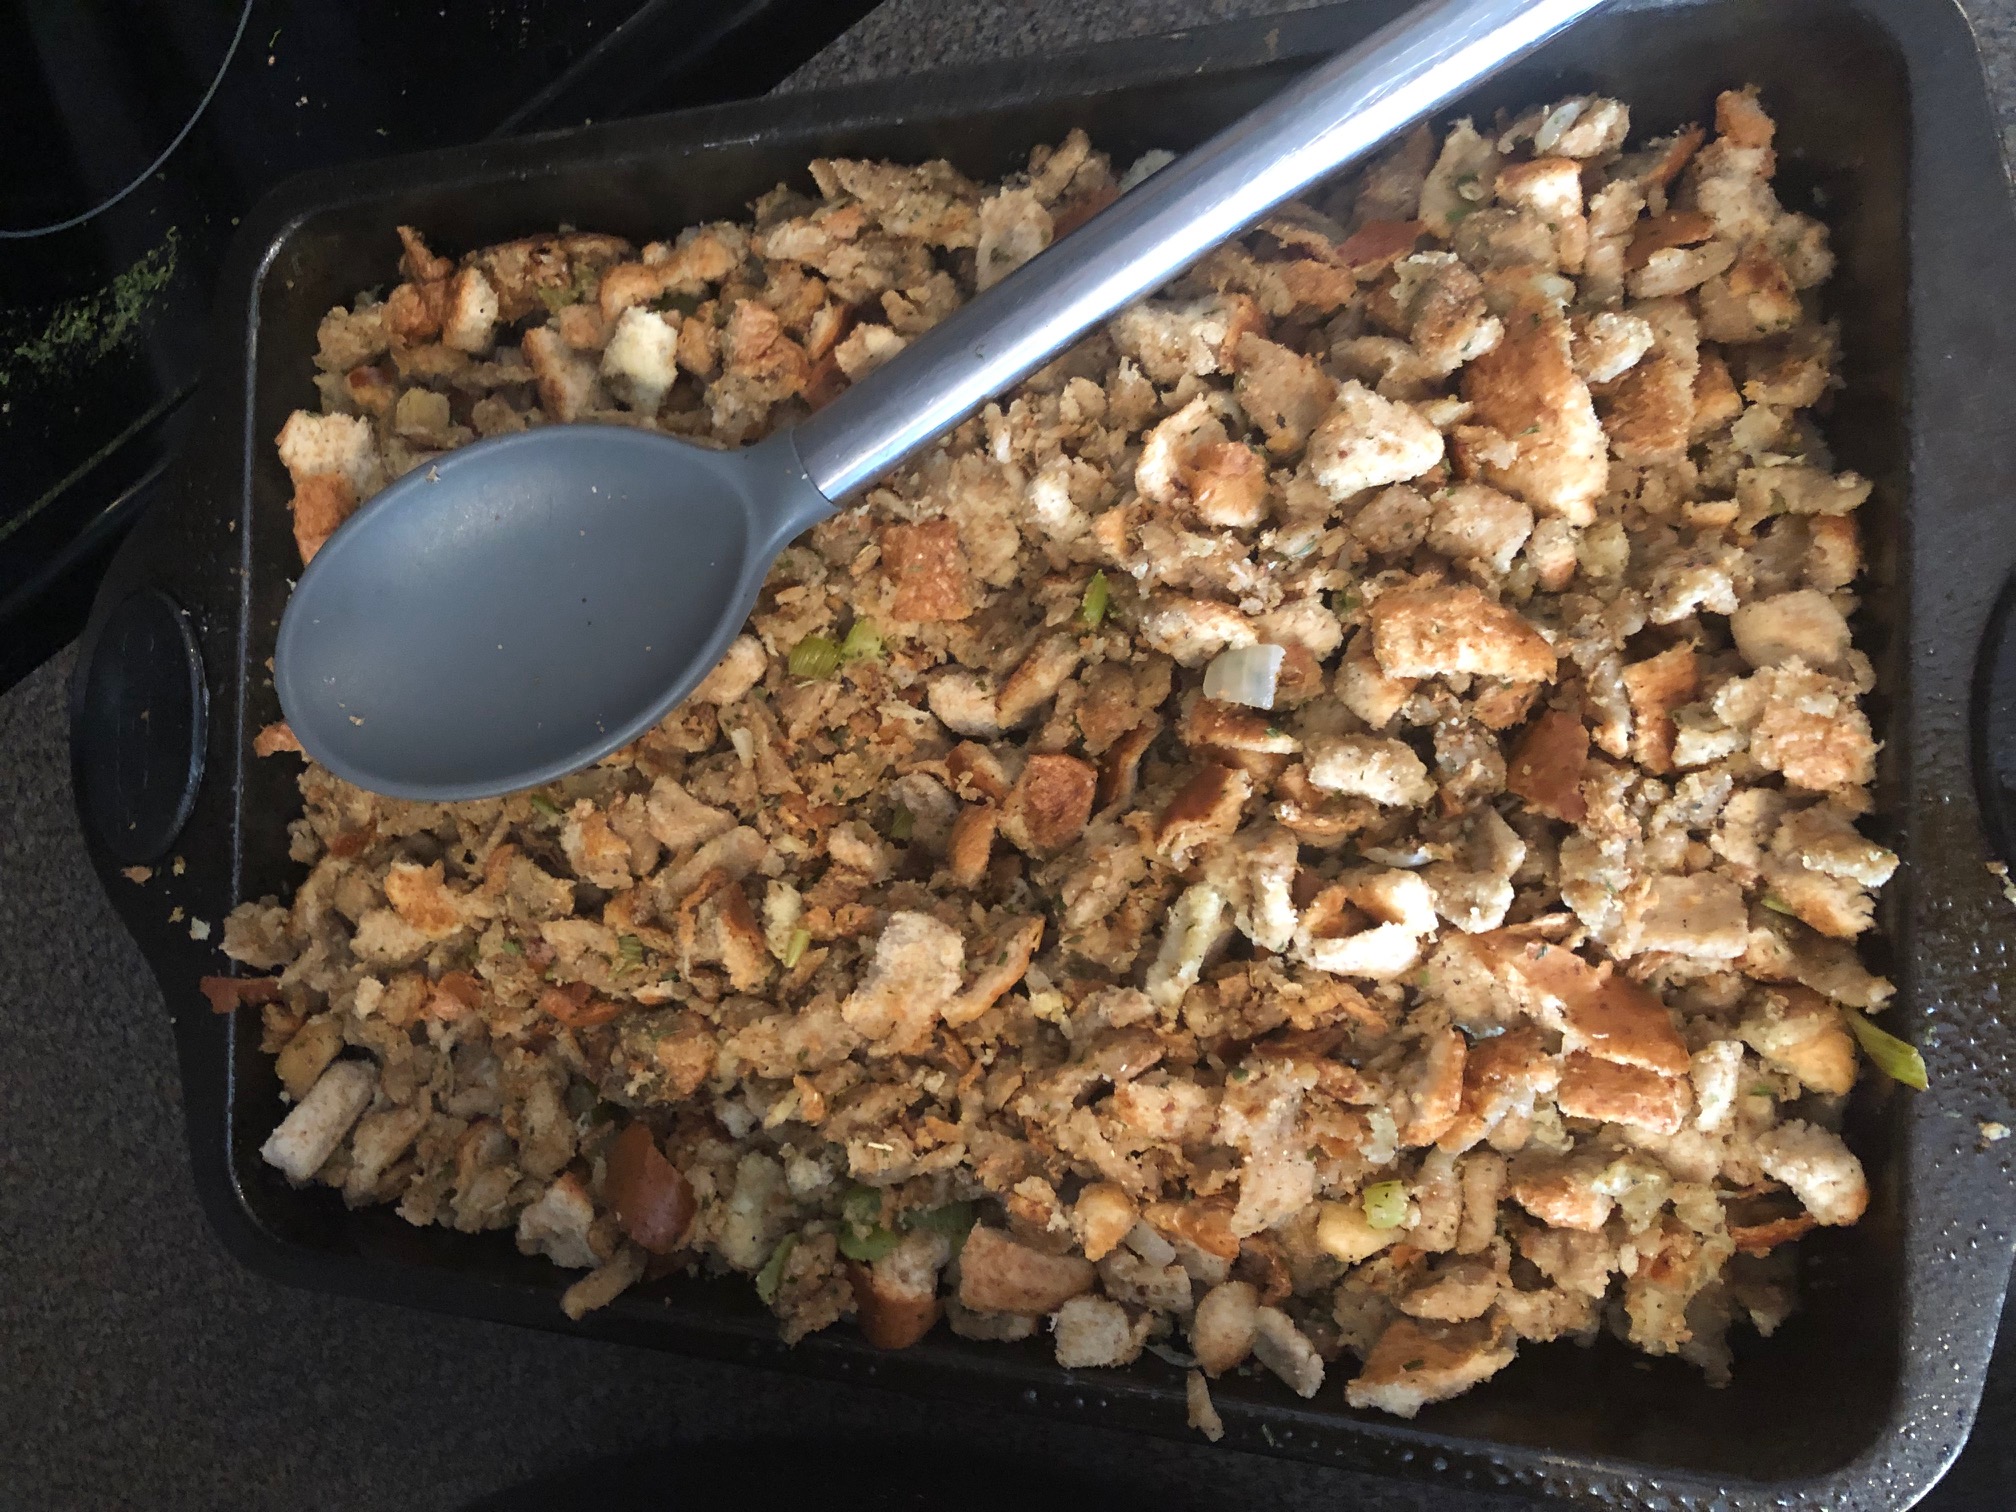 add remaining stuffing to 9X13 pans